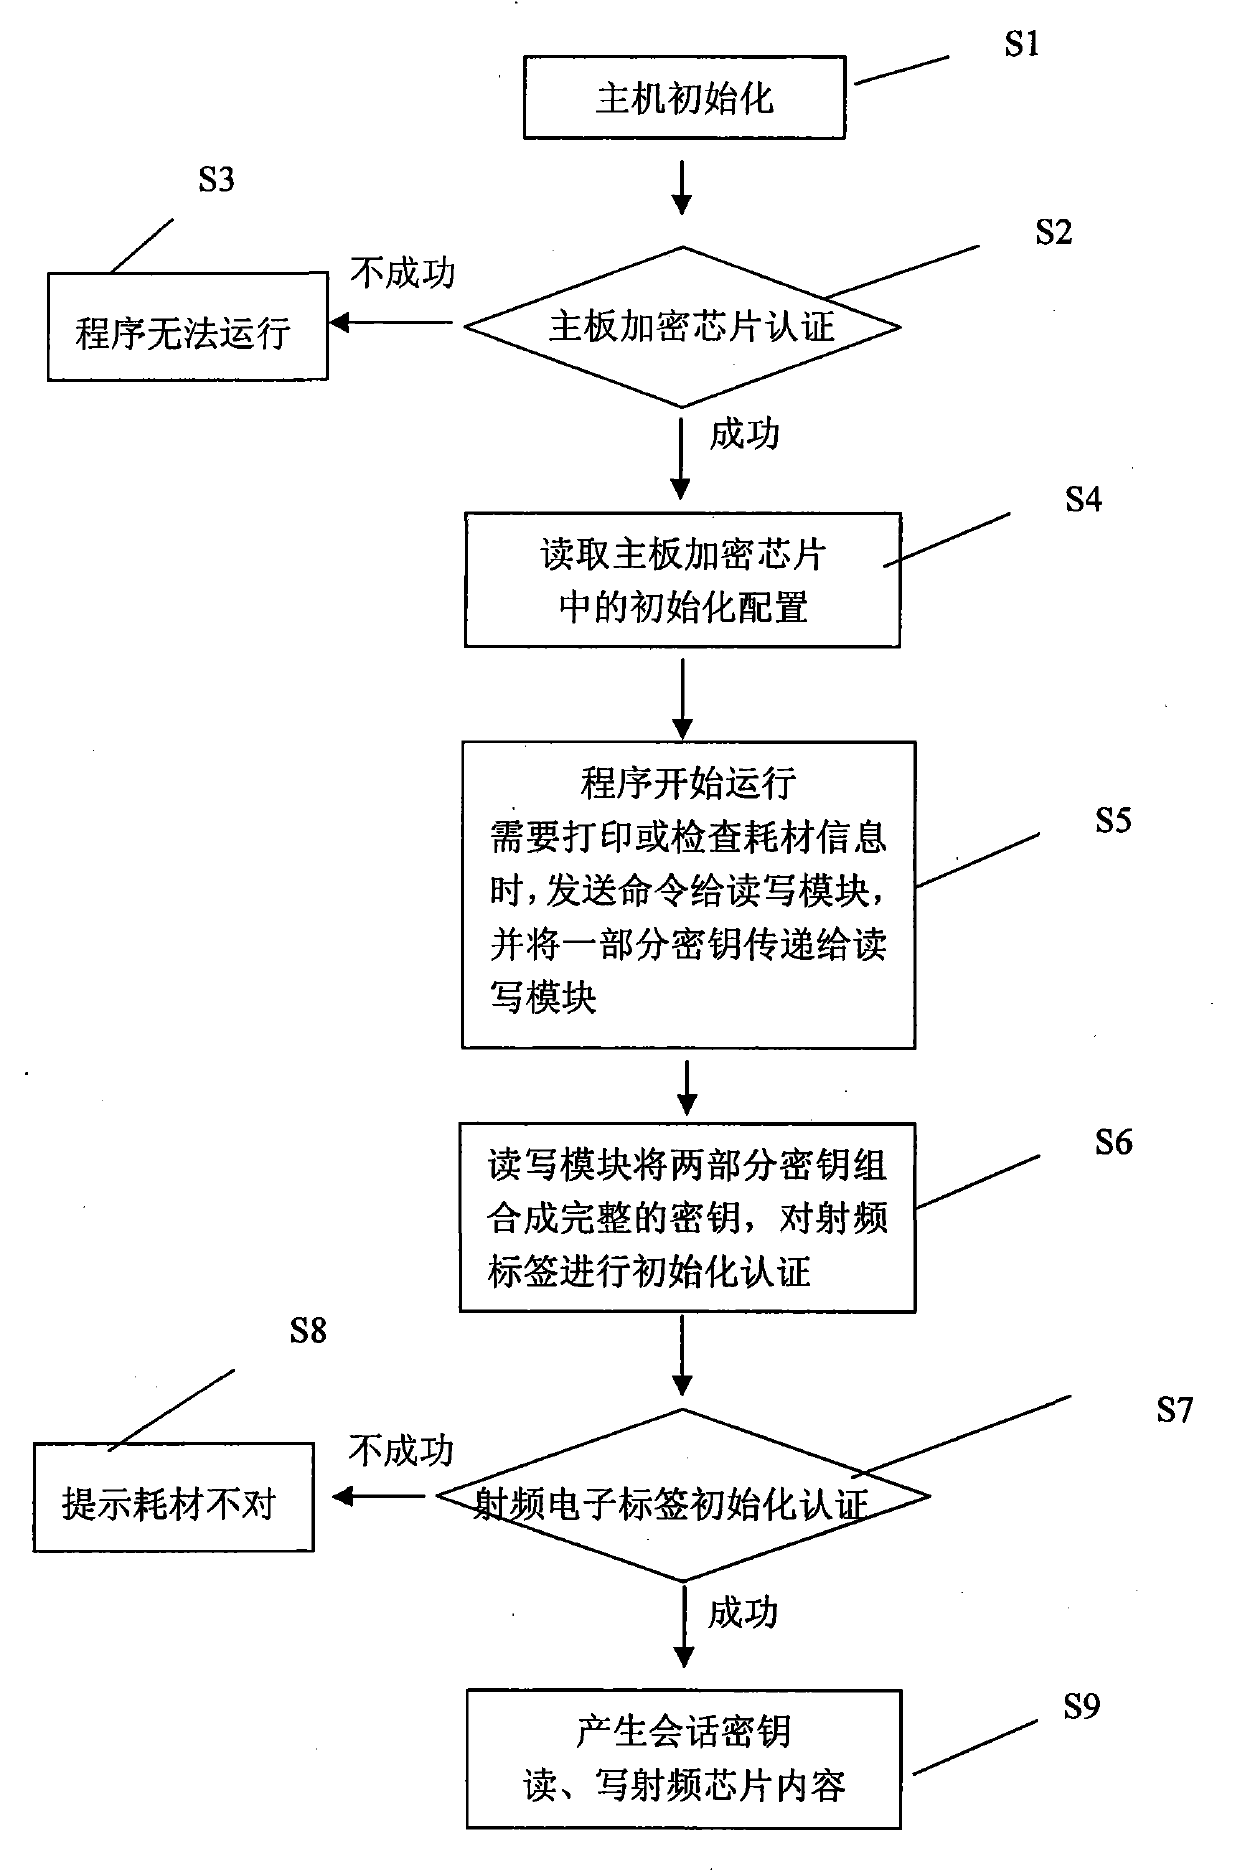 Method for encrypting consumable items through radio frequency identification electronic tag